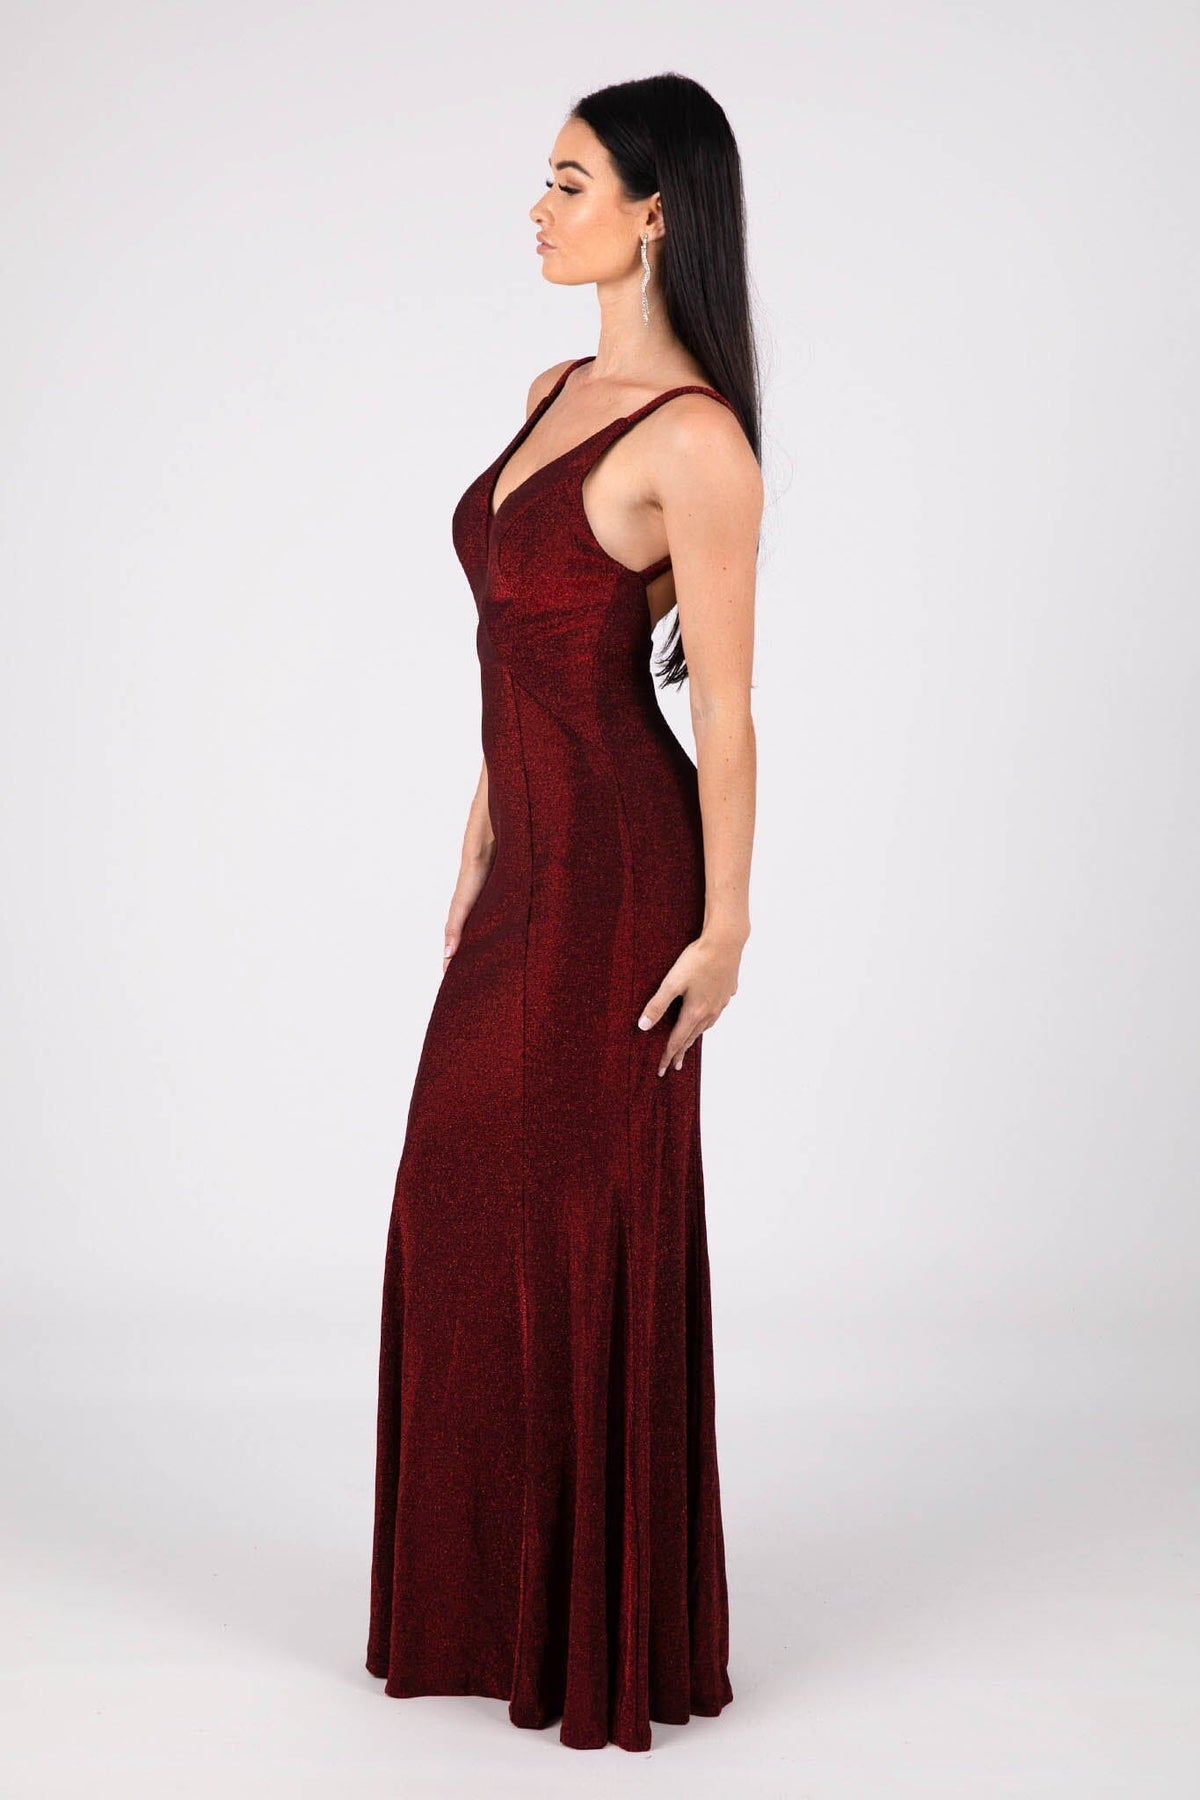 Side Image of Shimmer Deep Red Floor Length Fitted Evening Gown with V Neckline and Backless Design